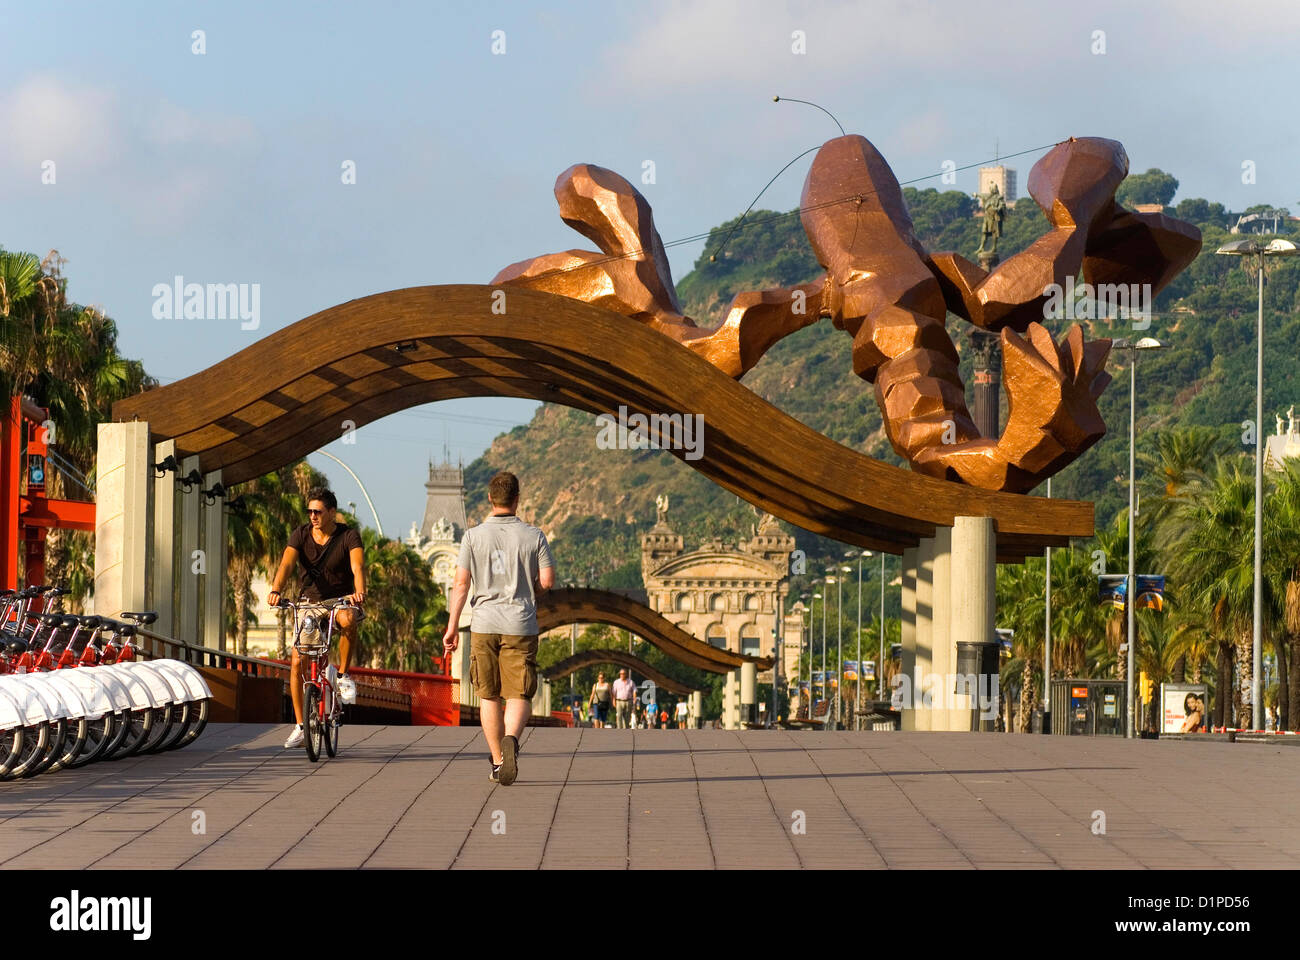 The Shrimp (prawn) or Gambrinus large dimensions sculpture designed by Spanish Javier Mariscal located on Paseo Colon, Barcelona Stock Photo